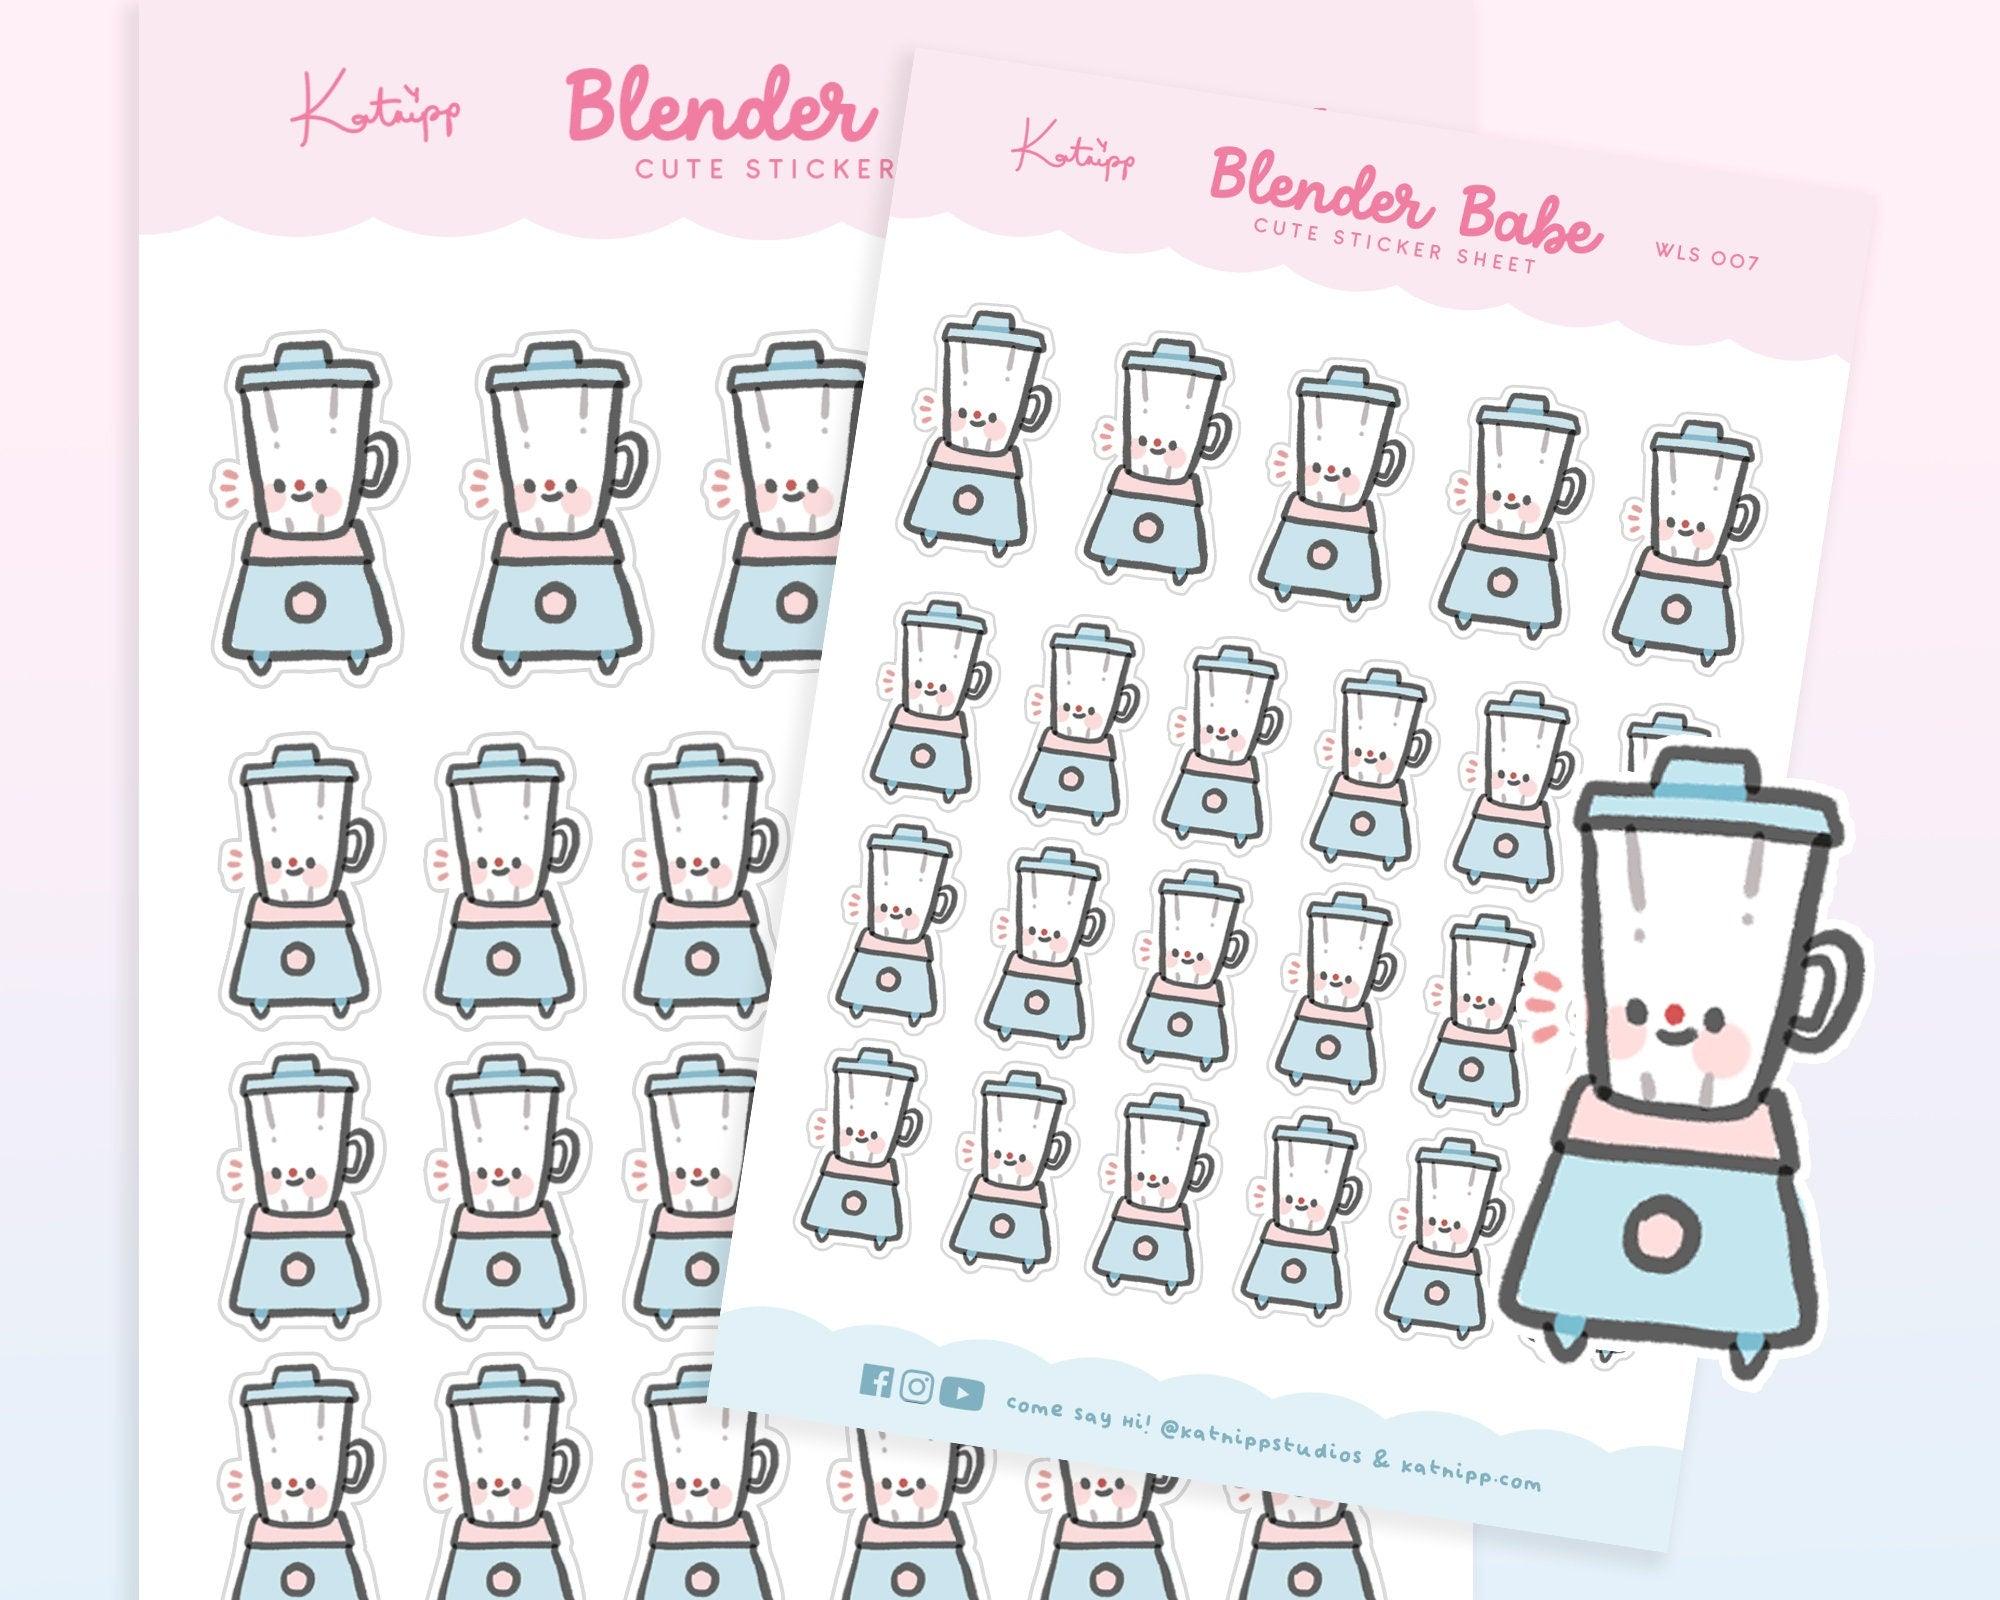 Adorable Food Cooking Blender Stickers - Handmade planner stickers for tracking cooking adventures.